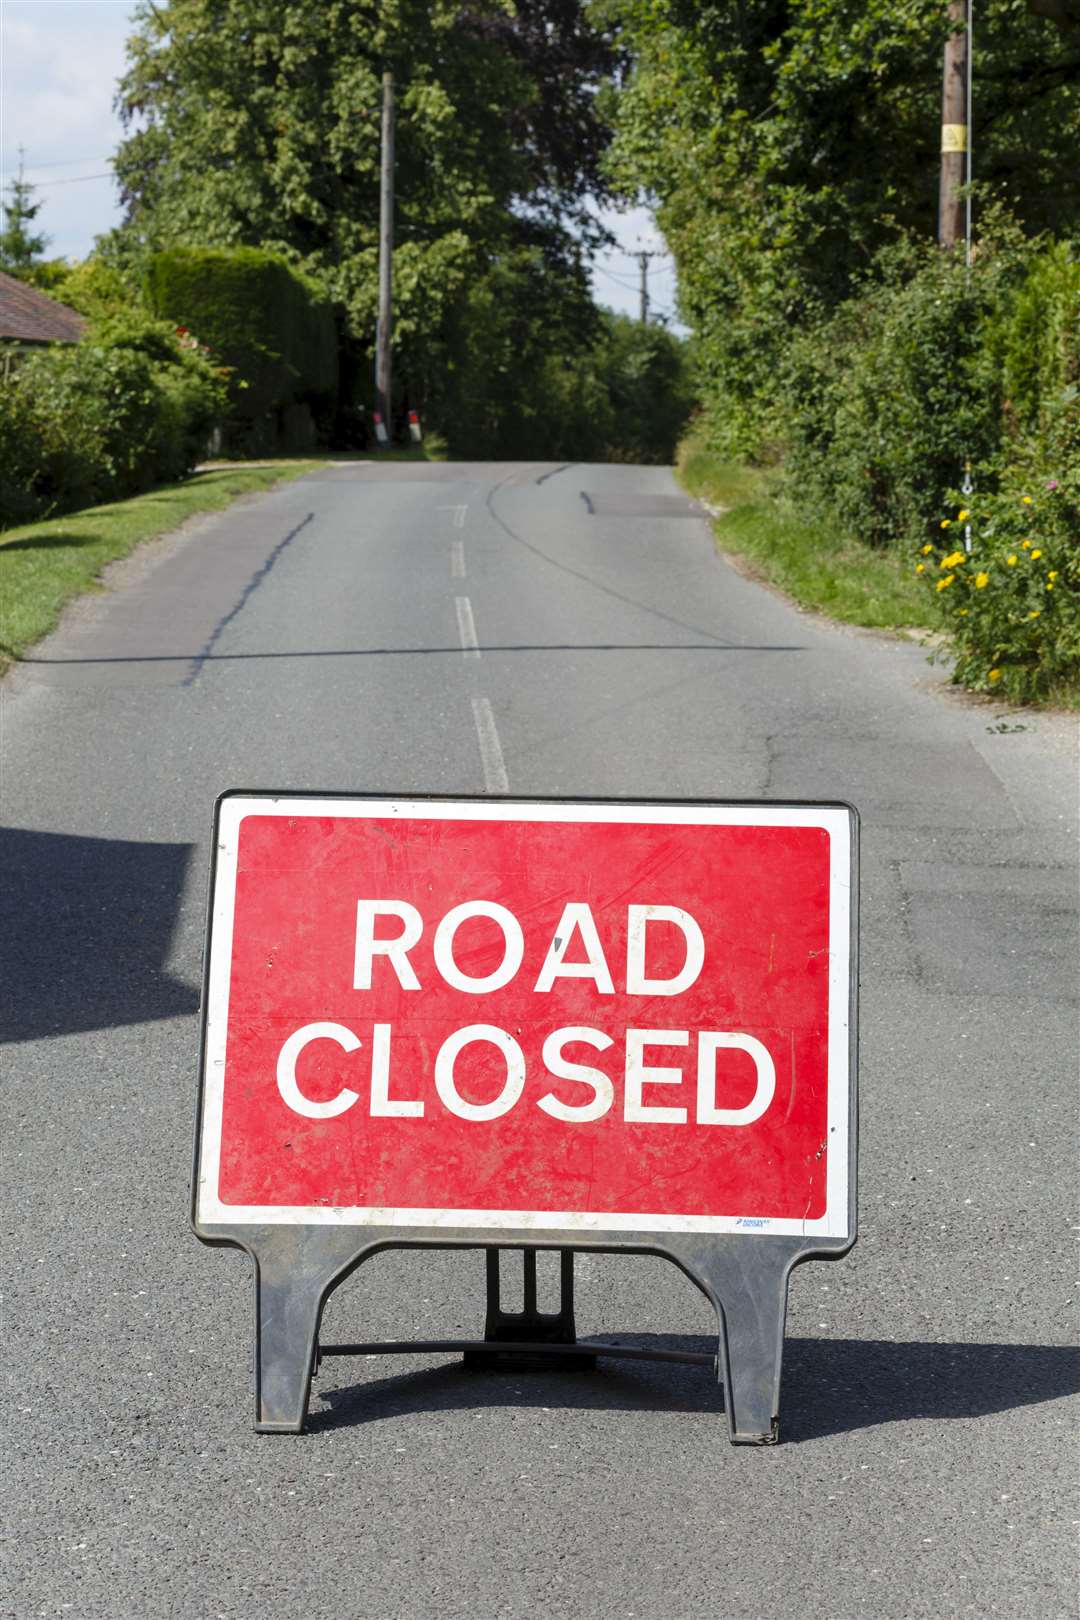 The C1056 will close temporarily next week for road repairs.